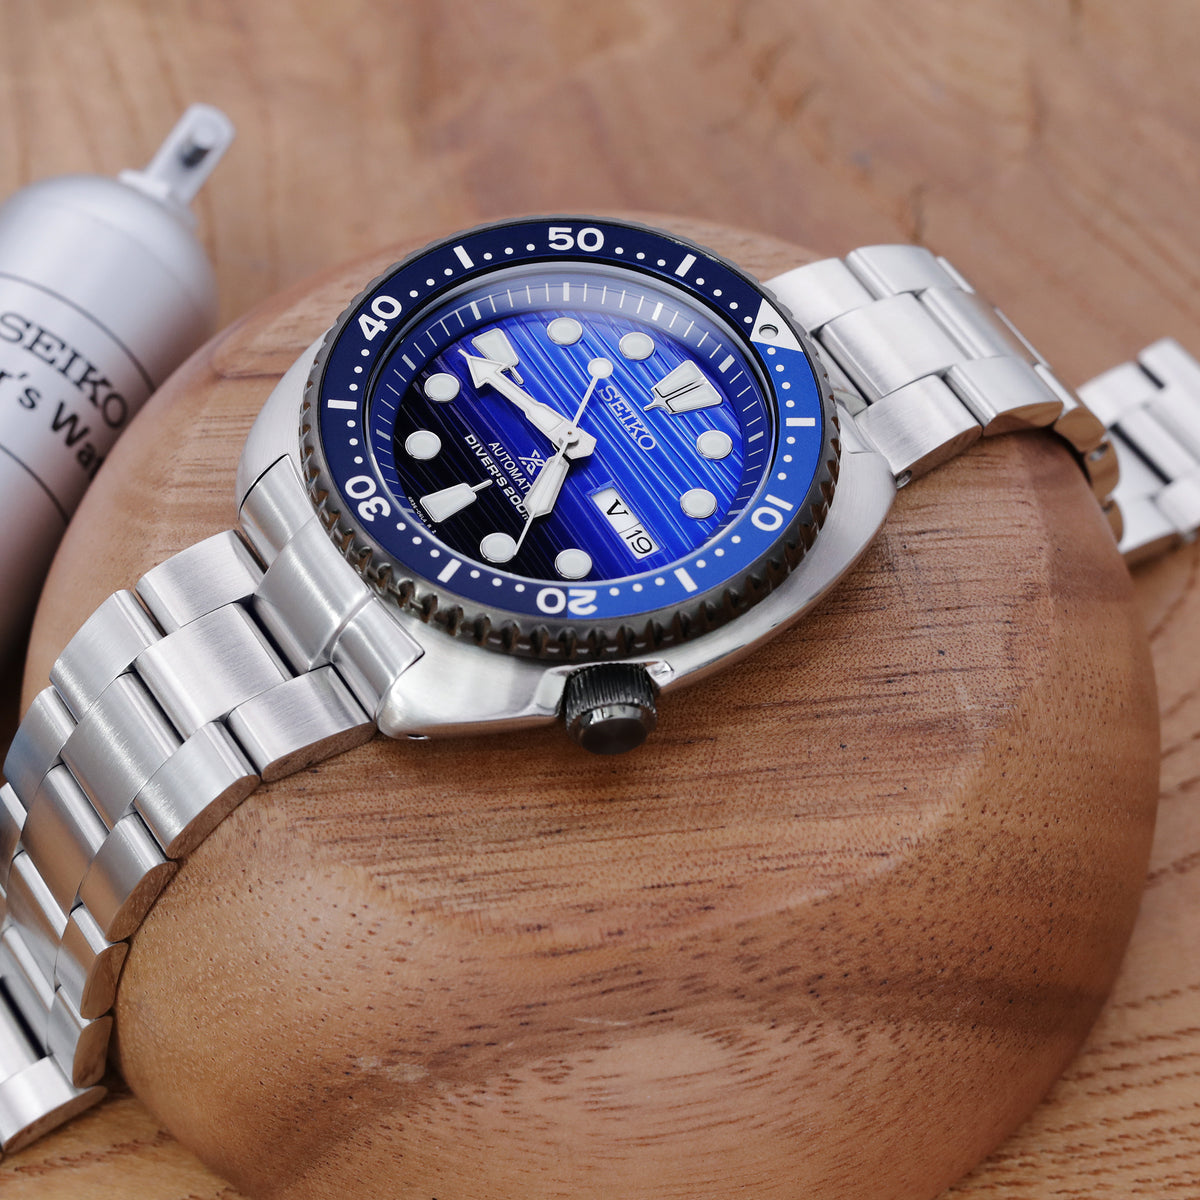 COMING SOON: Oyster bracelet for the Slim Turtle SPB31x.…